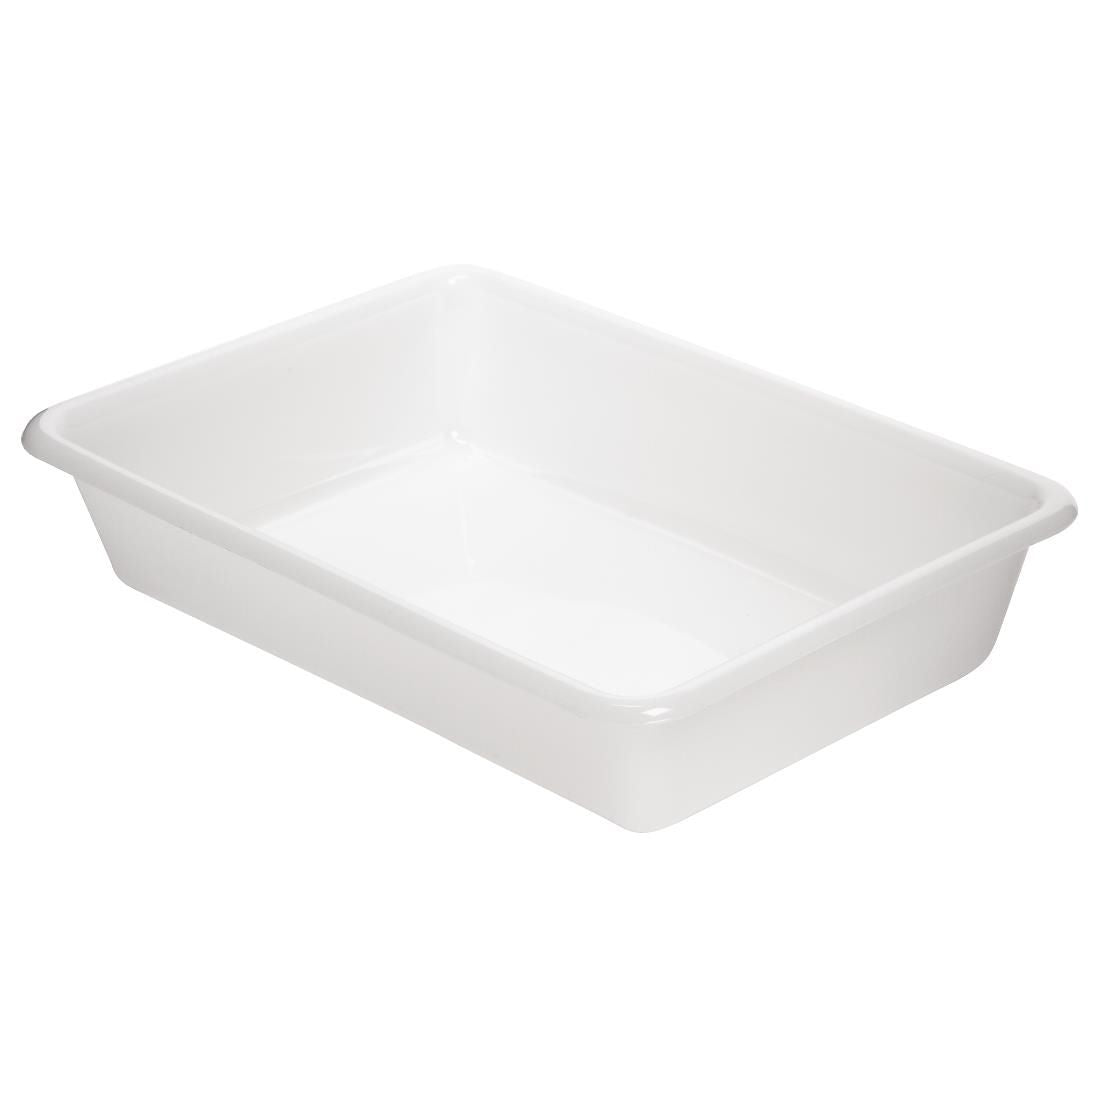 Araven Food Storage Tray 19in JD Catering Equipment Solutions Ltd